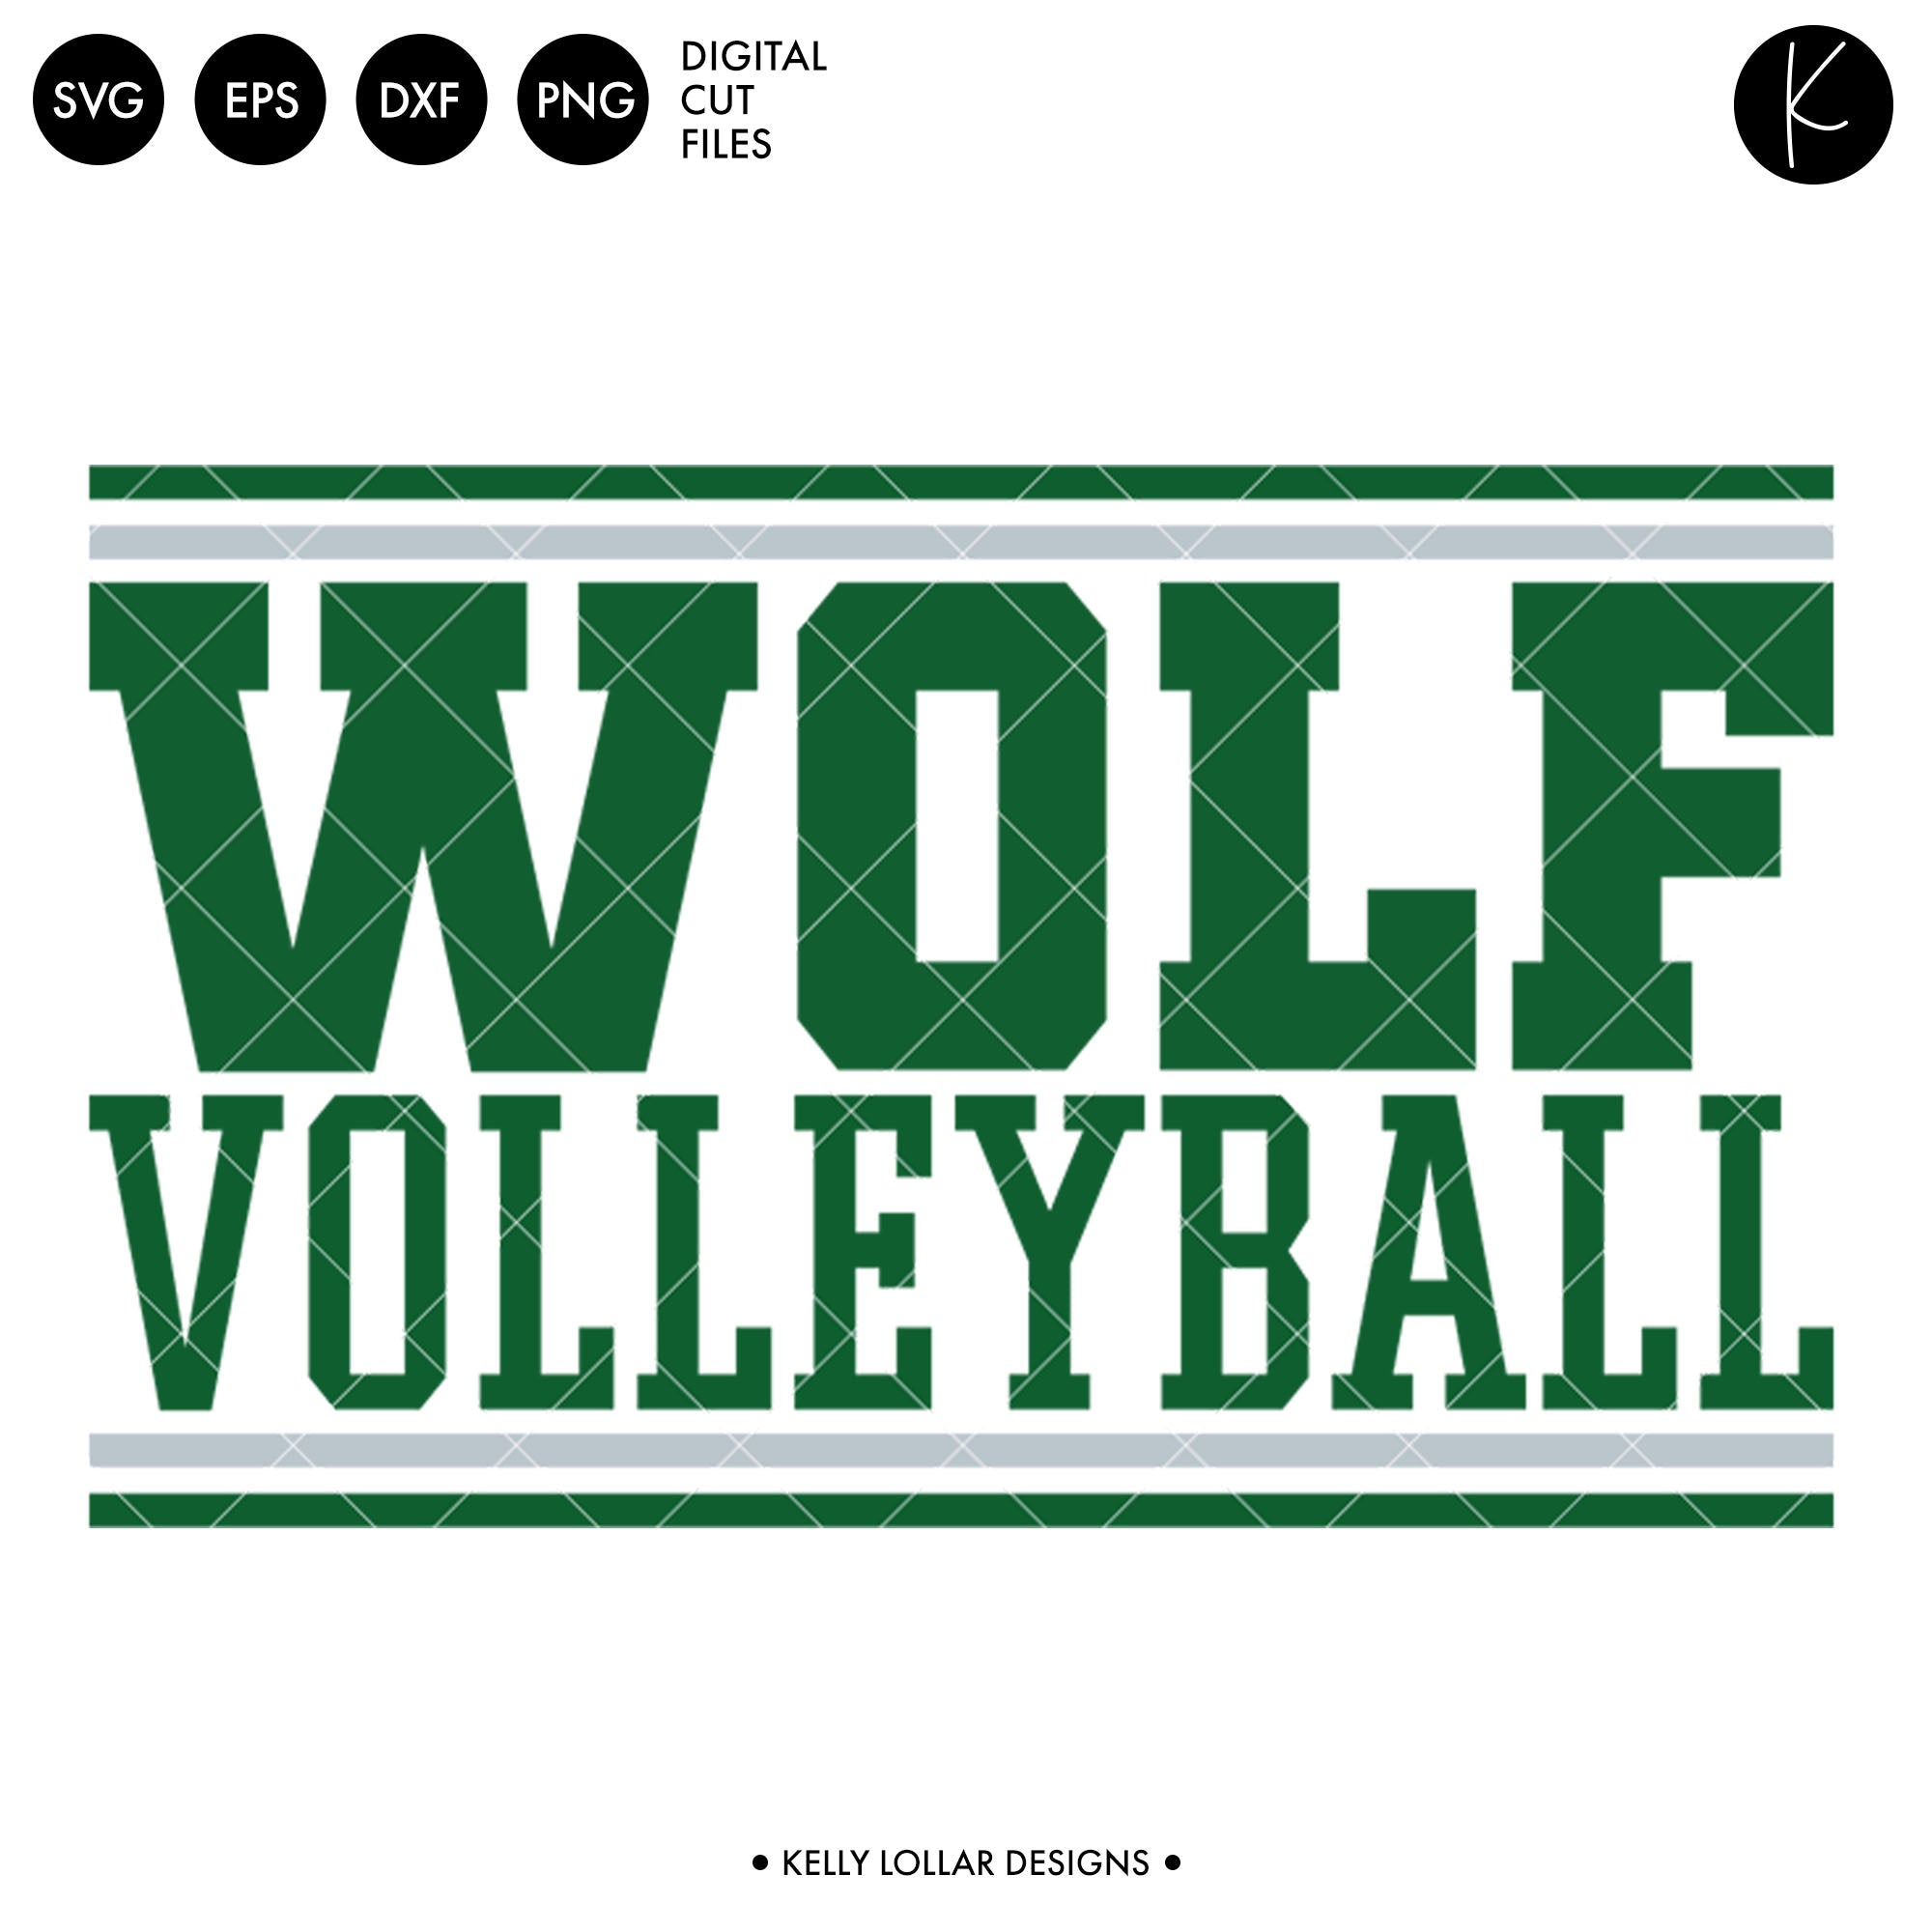 Download Wolves Volleyball Bundle Svg Dxf Eps Png Cut Files Kelly Lollar Designs